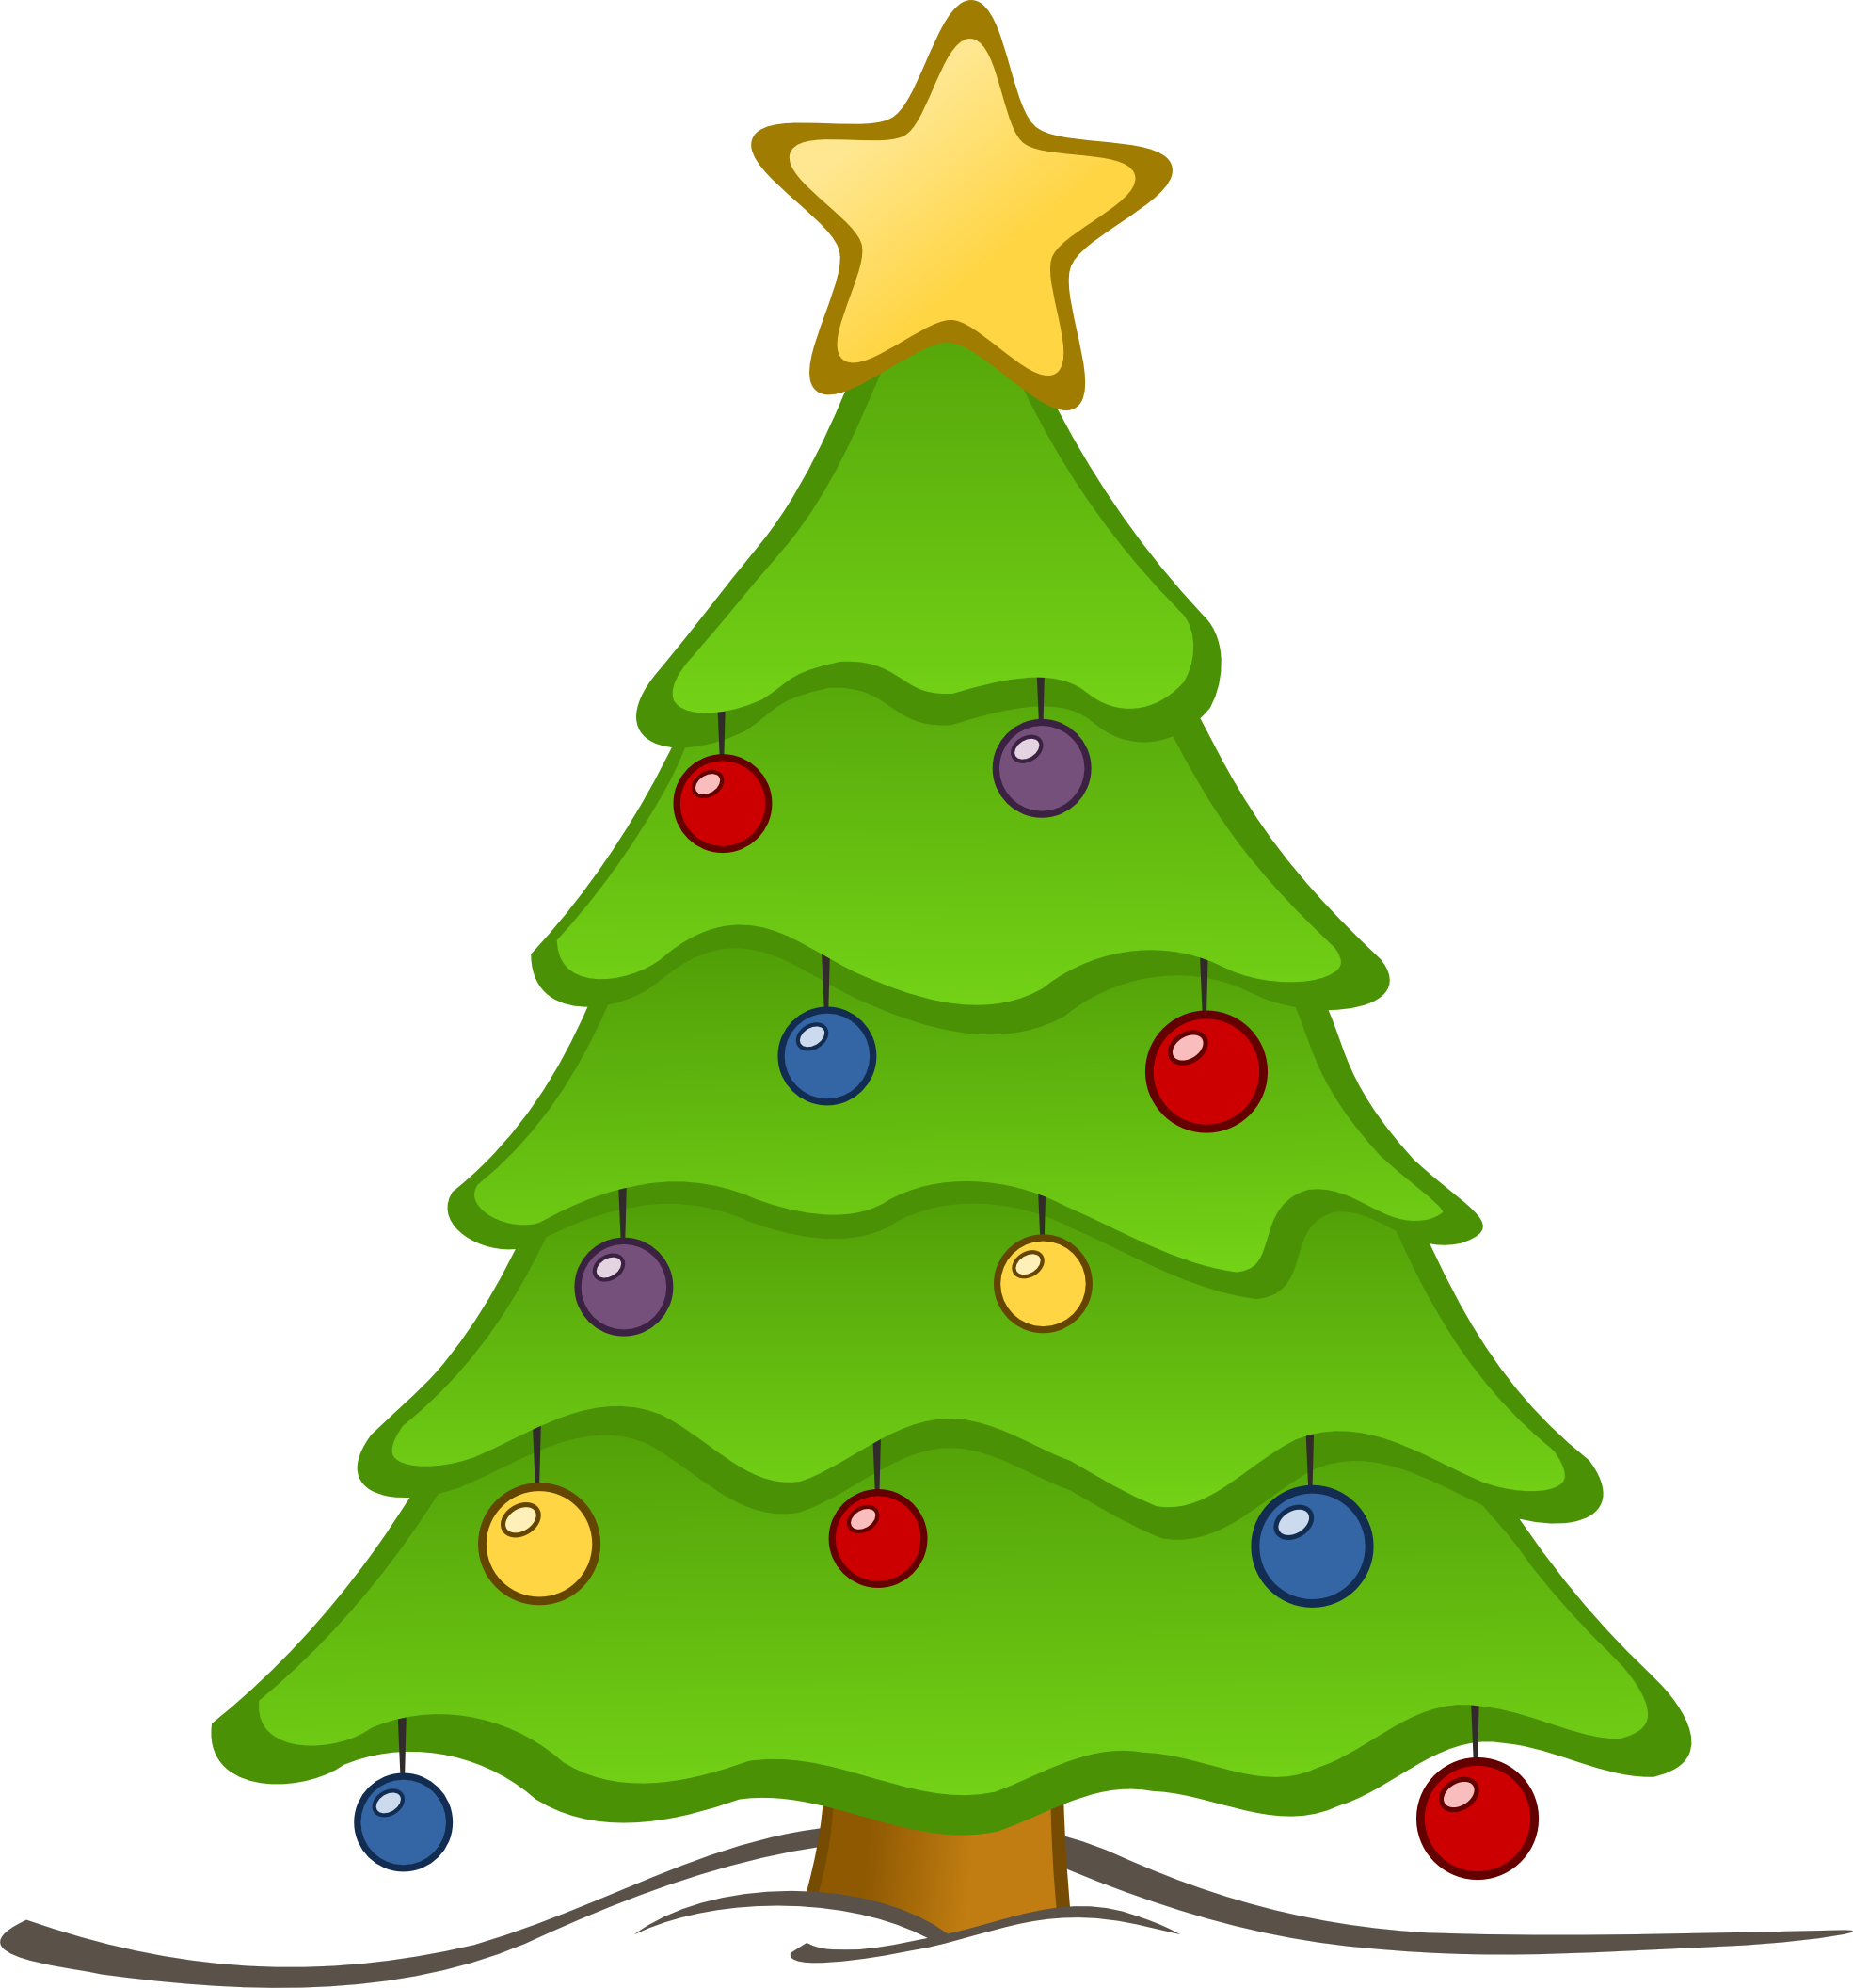 Detail Clipart Of Christmas Nomer 11